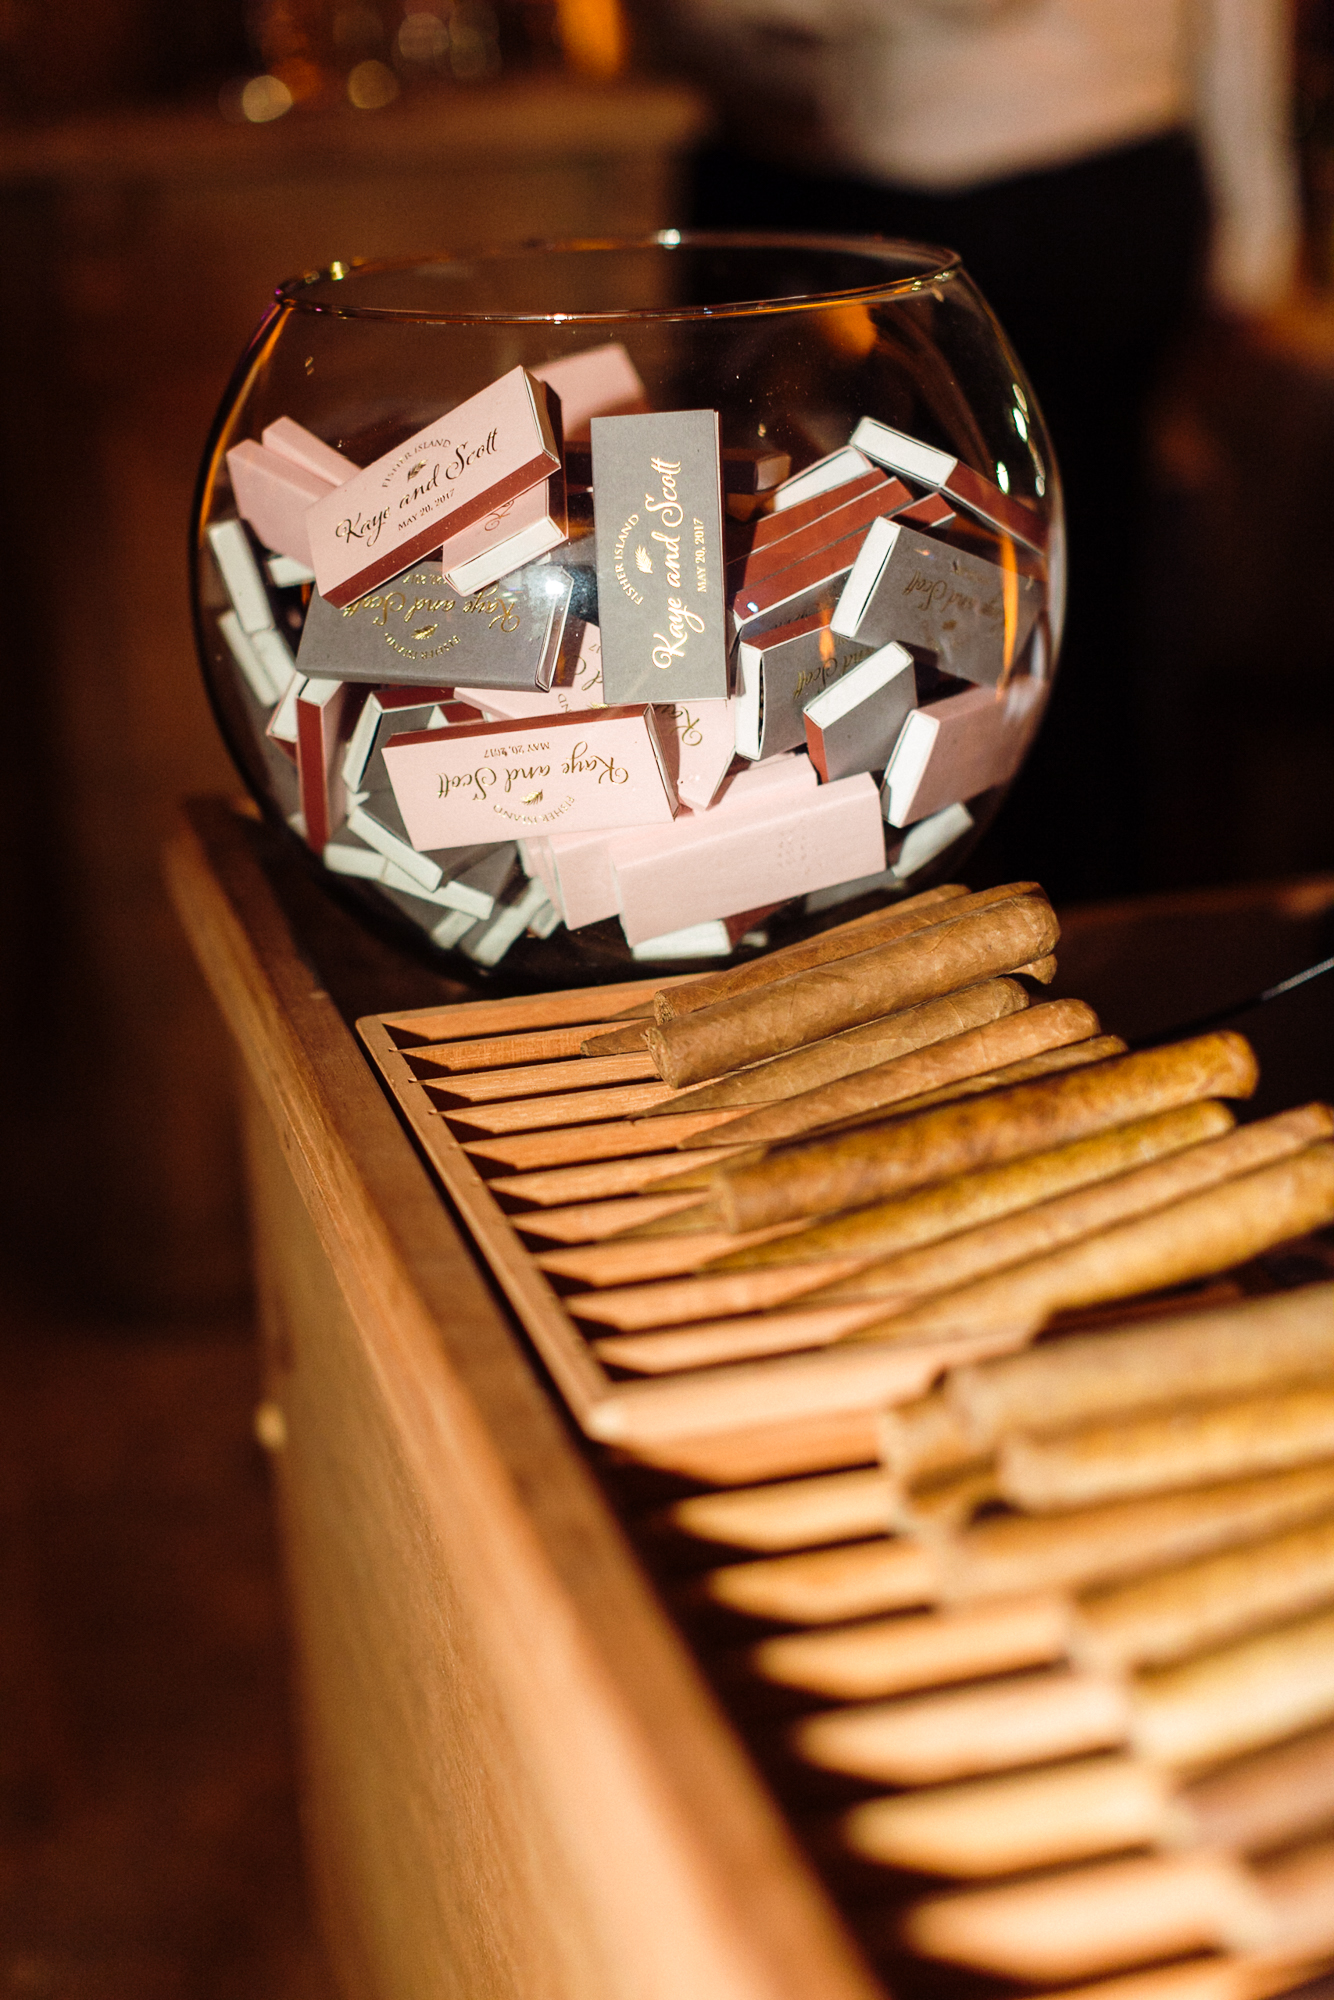 Custom match boxes with the couple's logo, names, and wedding date in gold foil were placed in a giant fish bowl next to the cigar roller